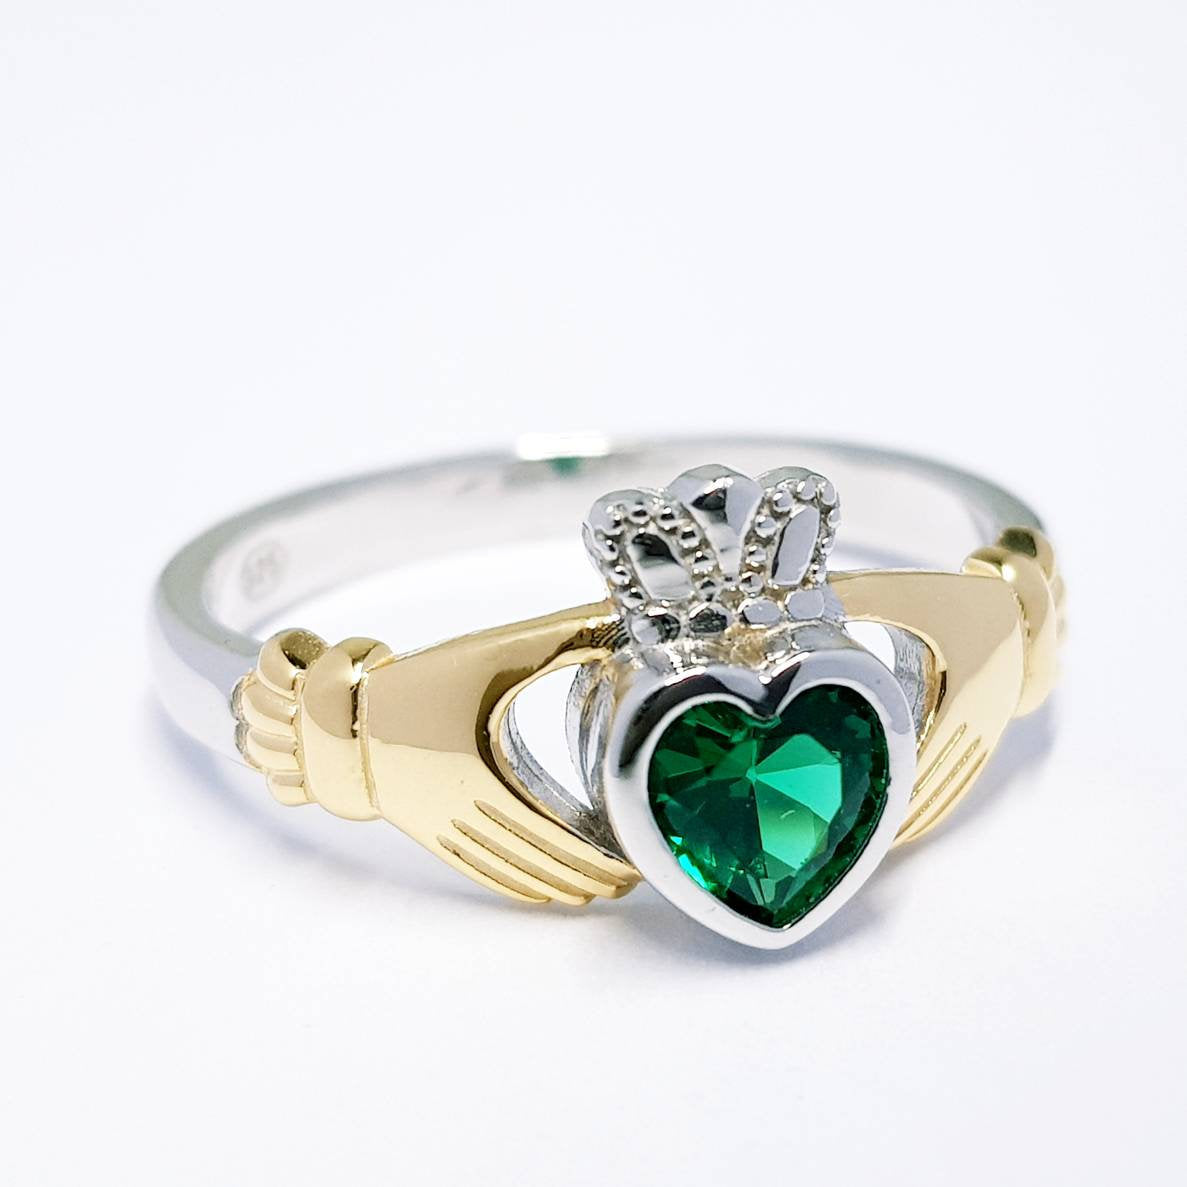 Sterling Silver Gold plated Claddagh ring set with emerald green stone, irish claddagh rings